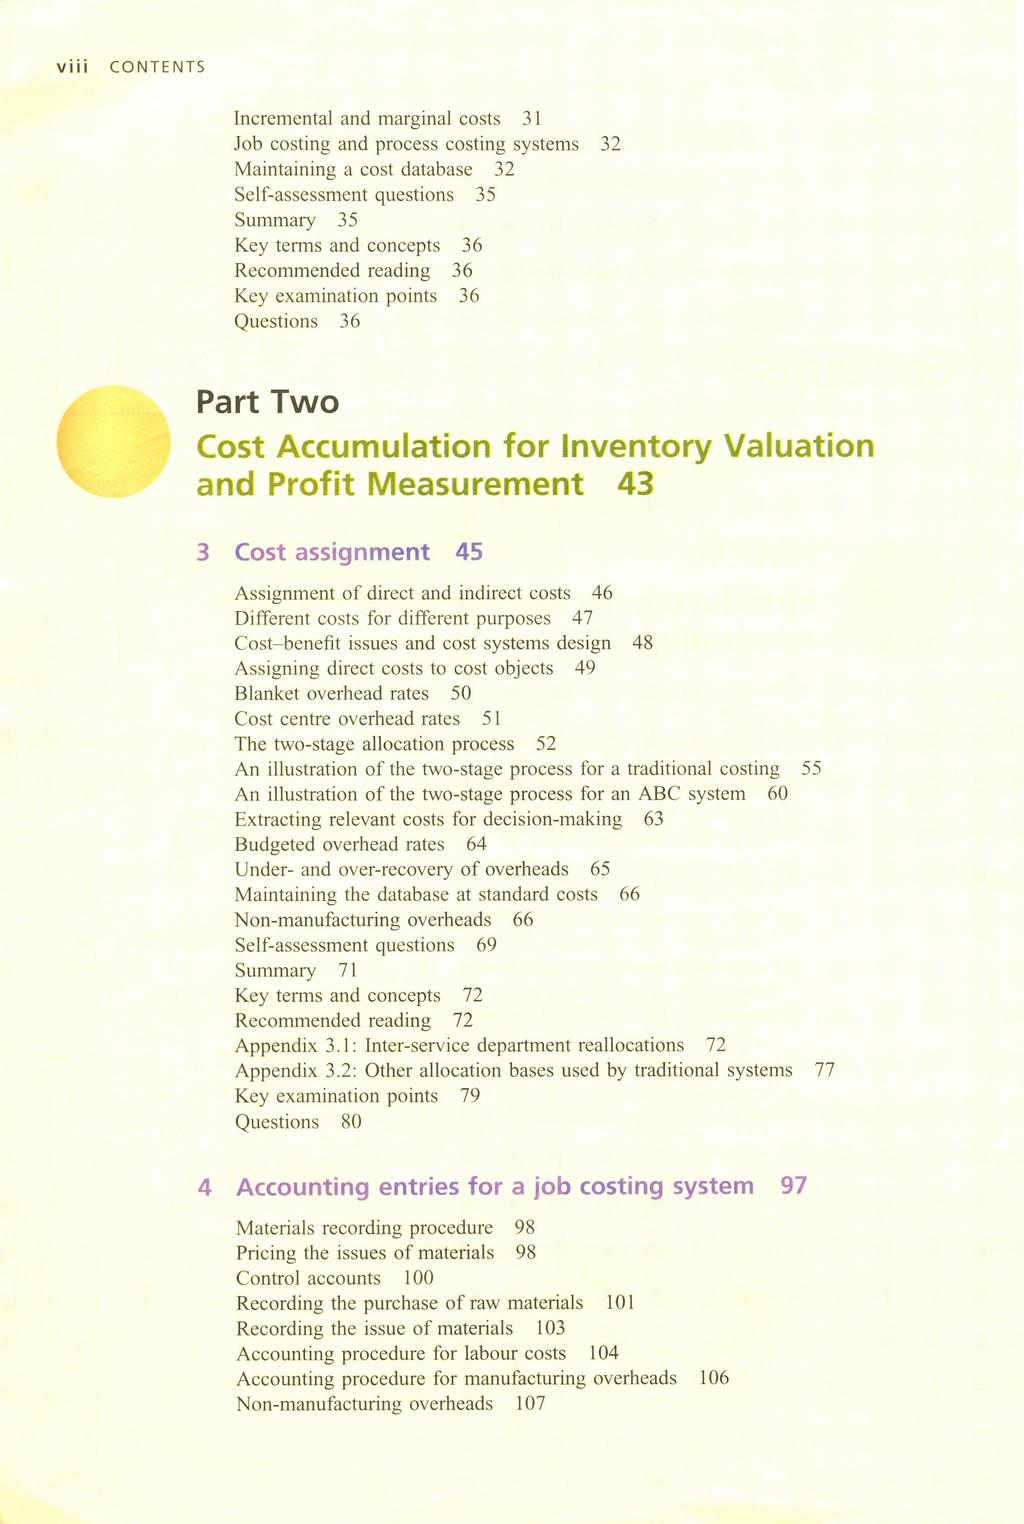 viii CONTENTS lncremental and marginal costs 31 Job costing and process costing systems 32 Maintaining a cost database 32 Self-assessment questions 35 Summary 35 Key terms and concepts 36 Recommended